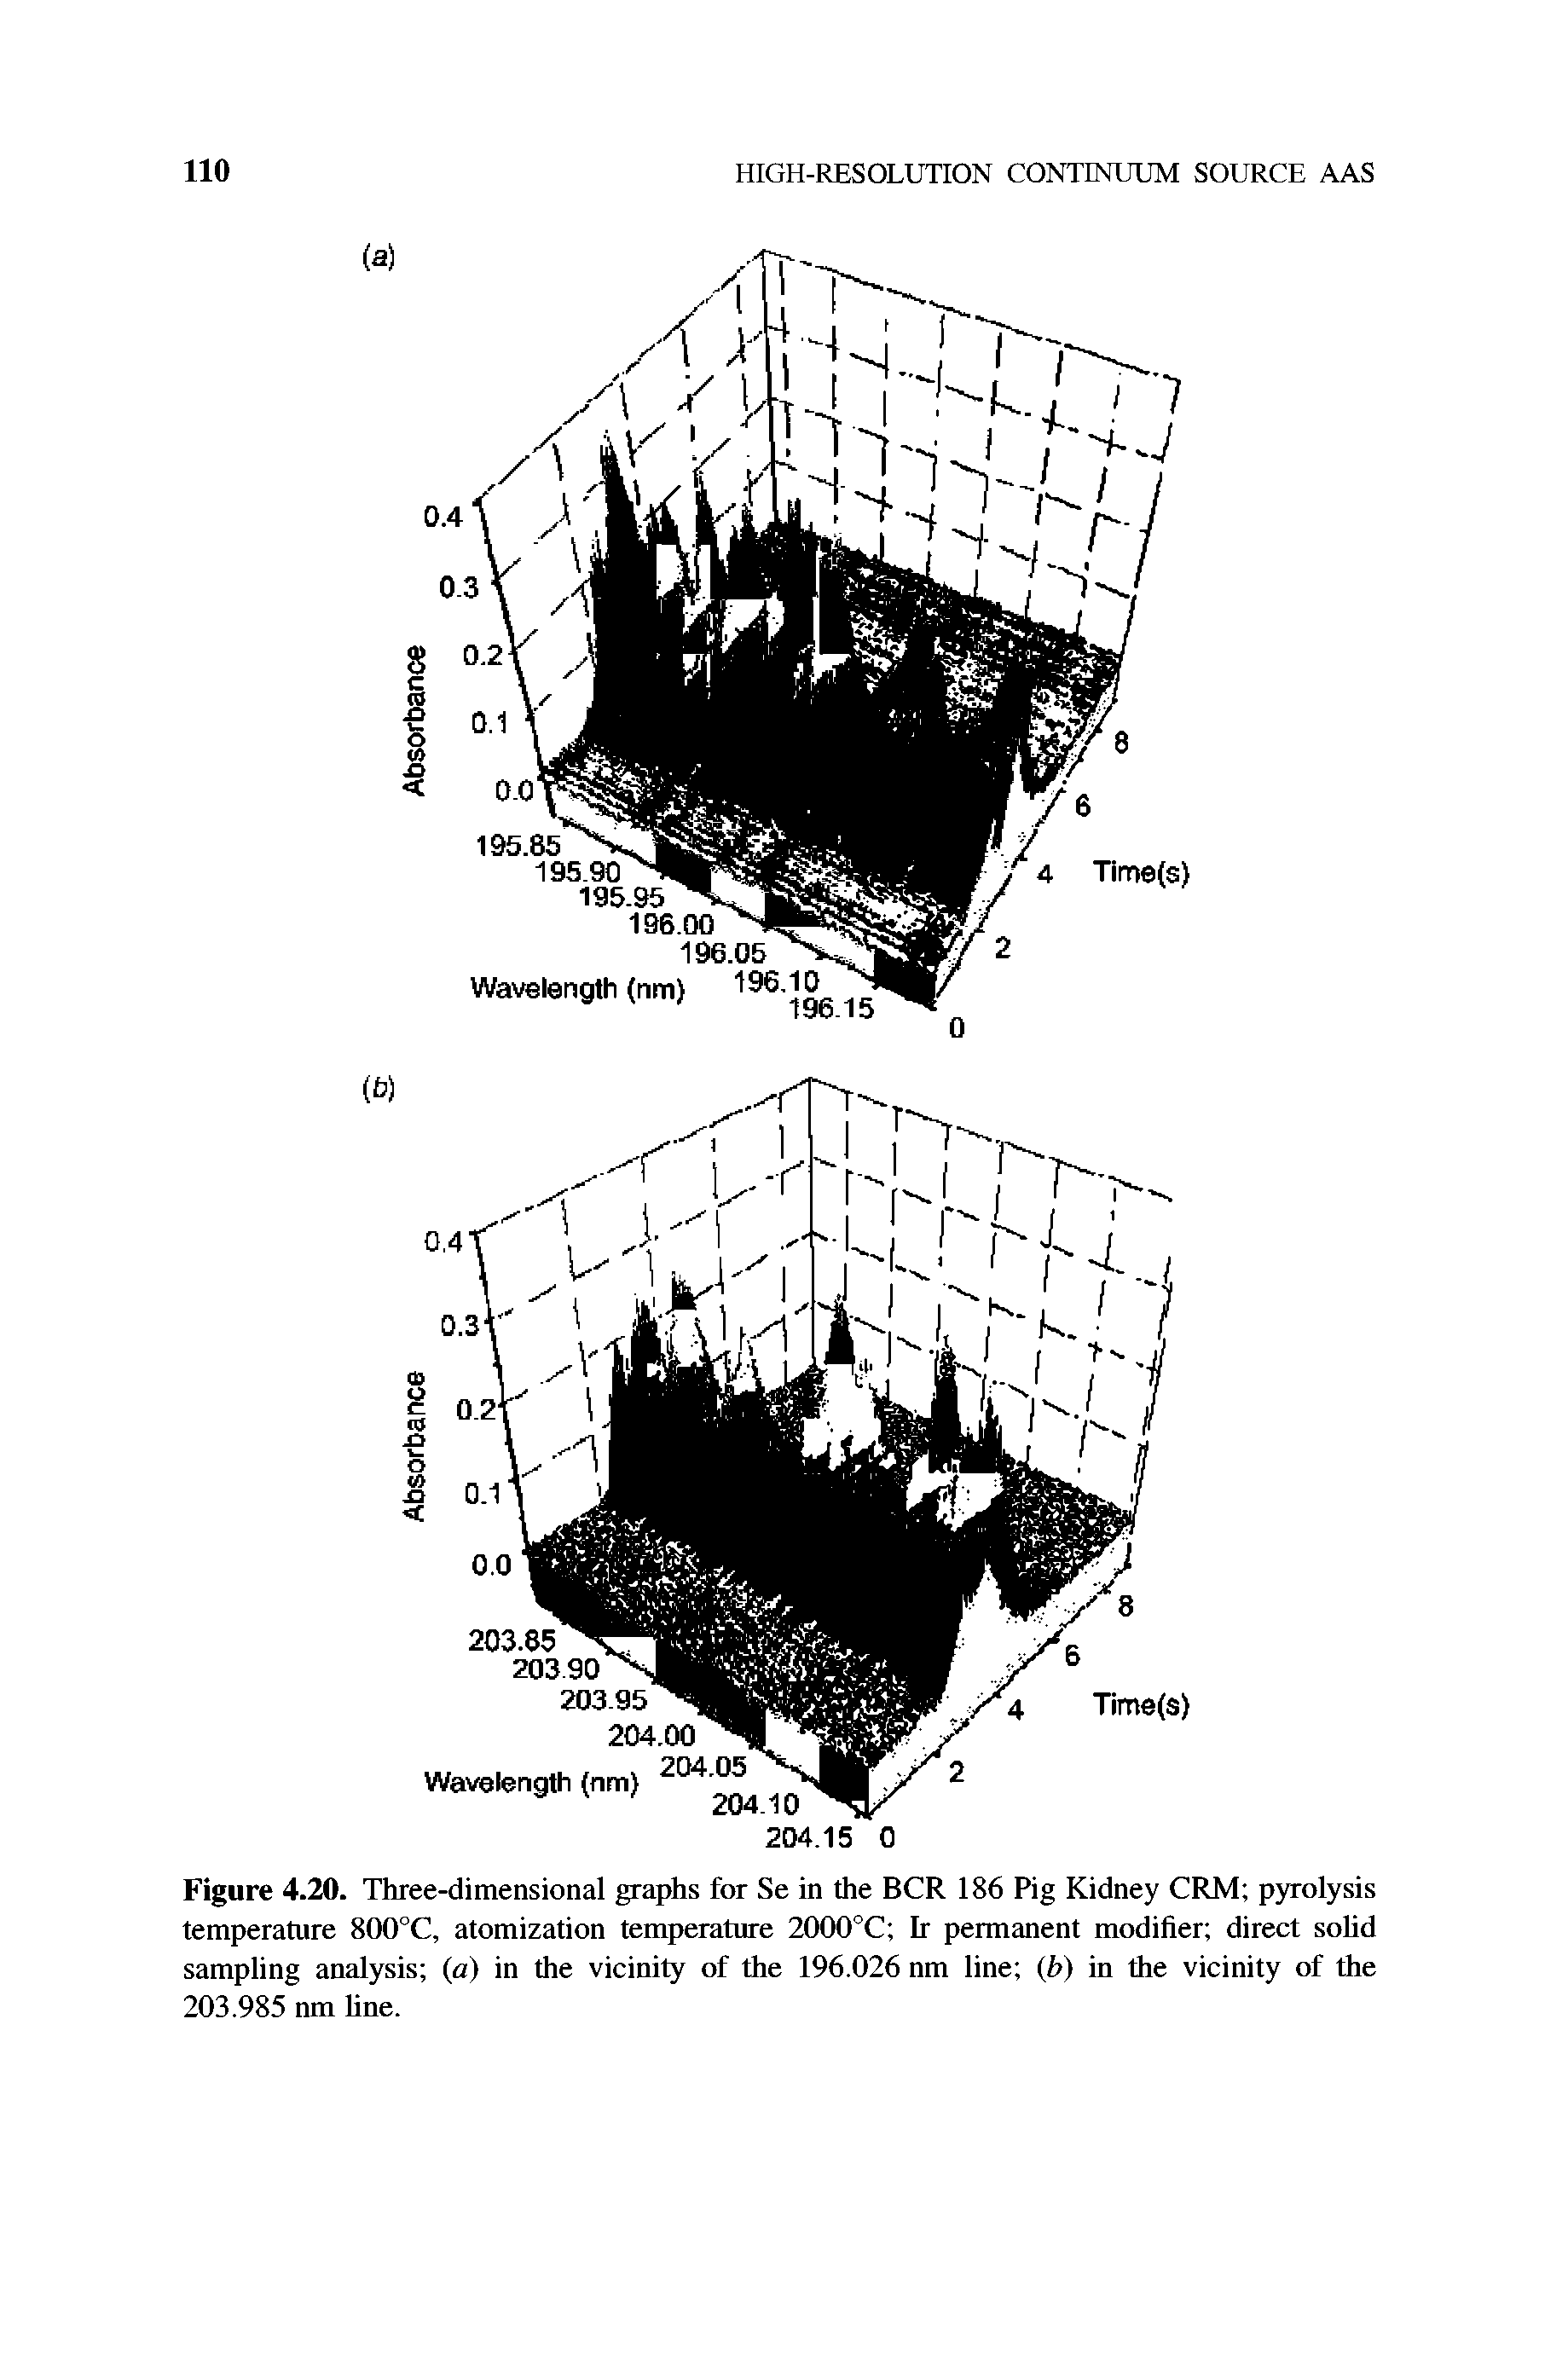 Figure 4.20. Three-dimensional graphs for Se in the BCR 186 Pig Kidney CRM pyrolysis temperature 800°C, atomization temperature 2000°C Ir permanent modifier direct solid sampling analysis (a) in the vicinity of the 196.026 nm line (b) in the vicinity of the 203.985 nm line.